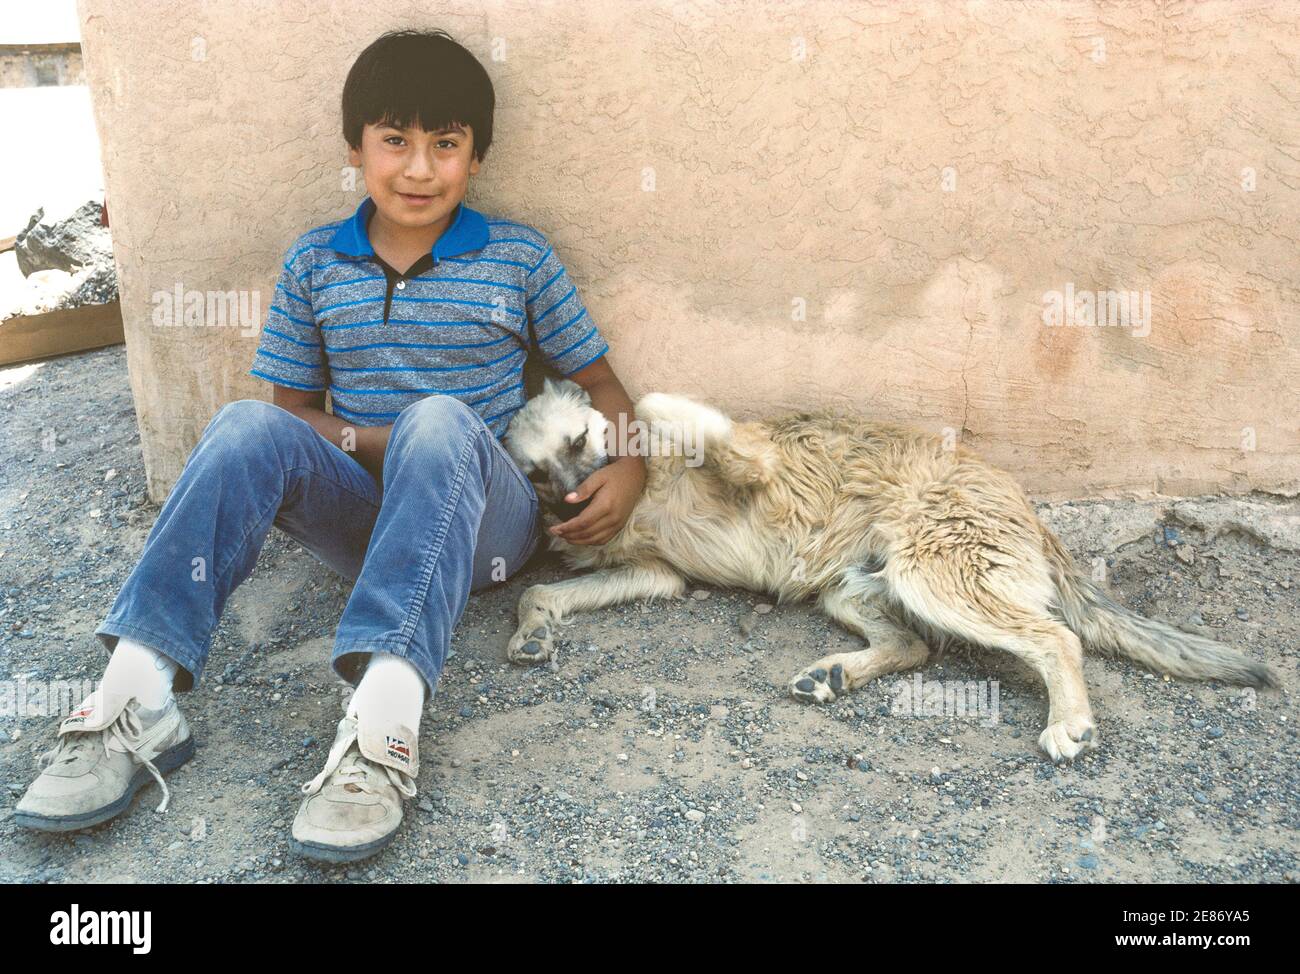 A young Native American boy and his pet dog rest in the shade at the side of his hilltop home in Acoma Pueblo, an American Indian community on a reservation west of Albuquerque, the capital of New Mexico in southwestern USA. Founded in the 12th Century, Acoma is one of the oldest continuously inhabited settlements in North America. The youngster is among the tribal members that live in rock and adobe dwellings atop a remote sandstone mesa. Tourists are welcome to join guided tours of his historic Sky City (Old Acoma) village. Stock Photo